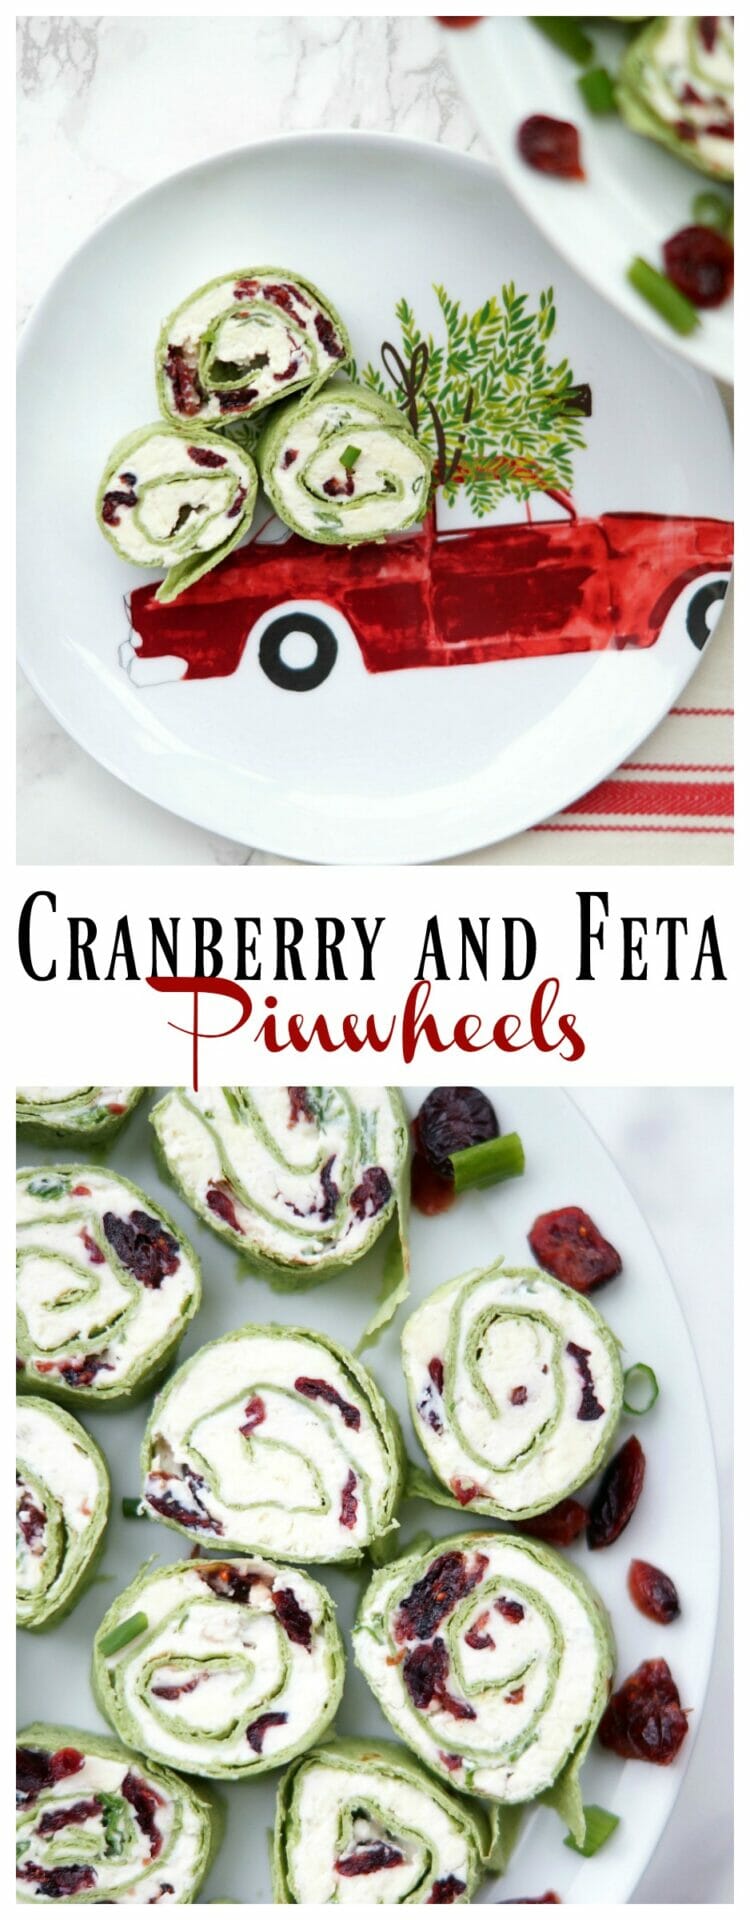 Cranberry and Feta Pinwheels, an easy appetizer perfect for Christmas!